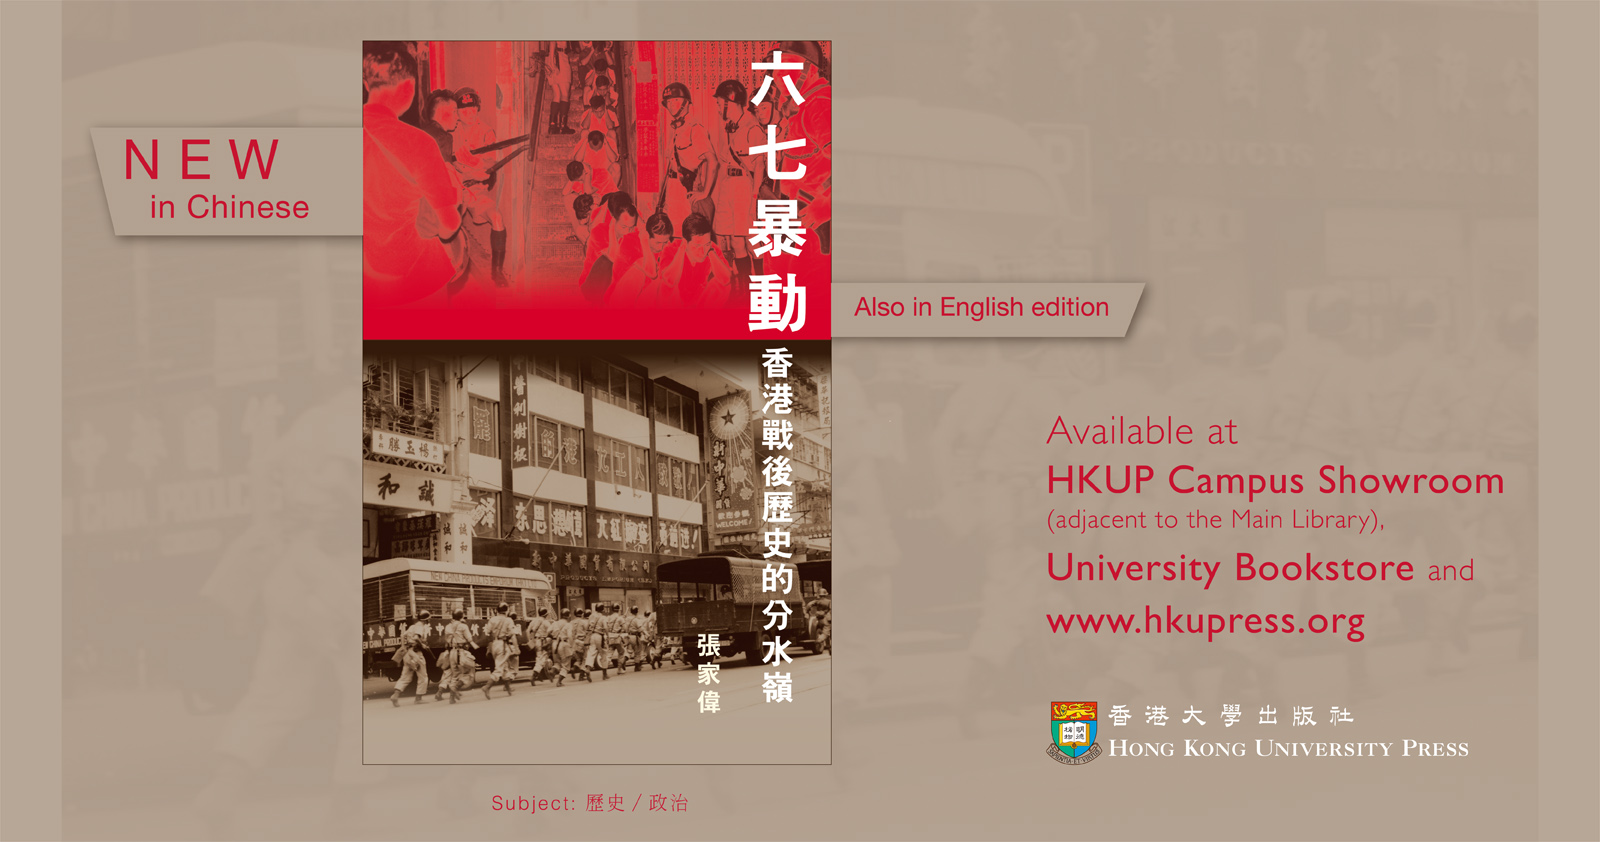 ...critical analysis of the 1967 riots based on declassified files from the British government and recollection by key players during the events....now at HKU Press!